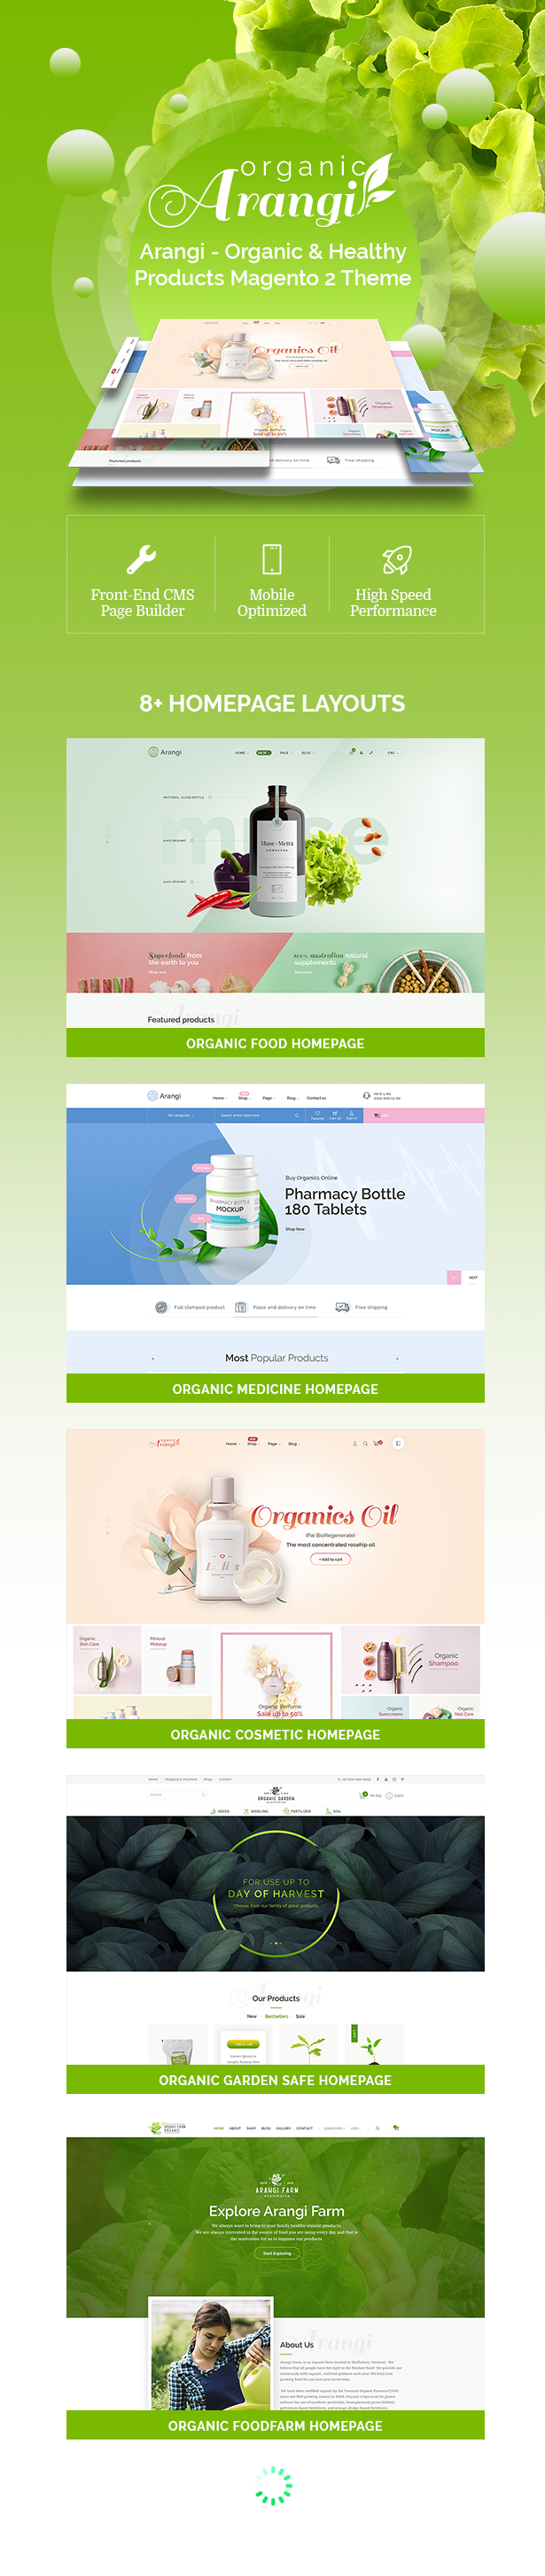 Organic & Healthy Products Magento 2 Theme 